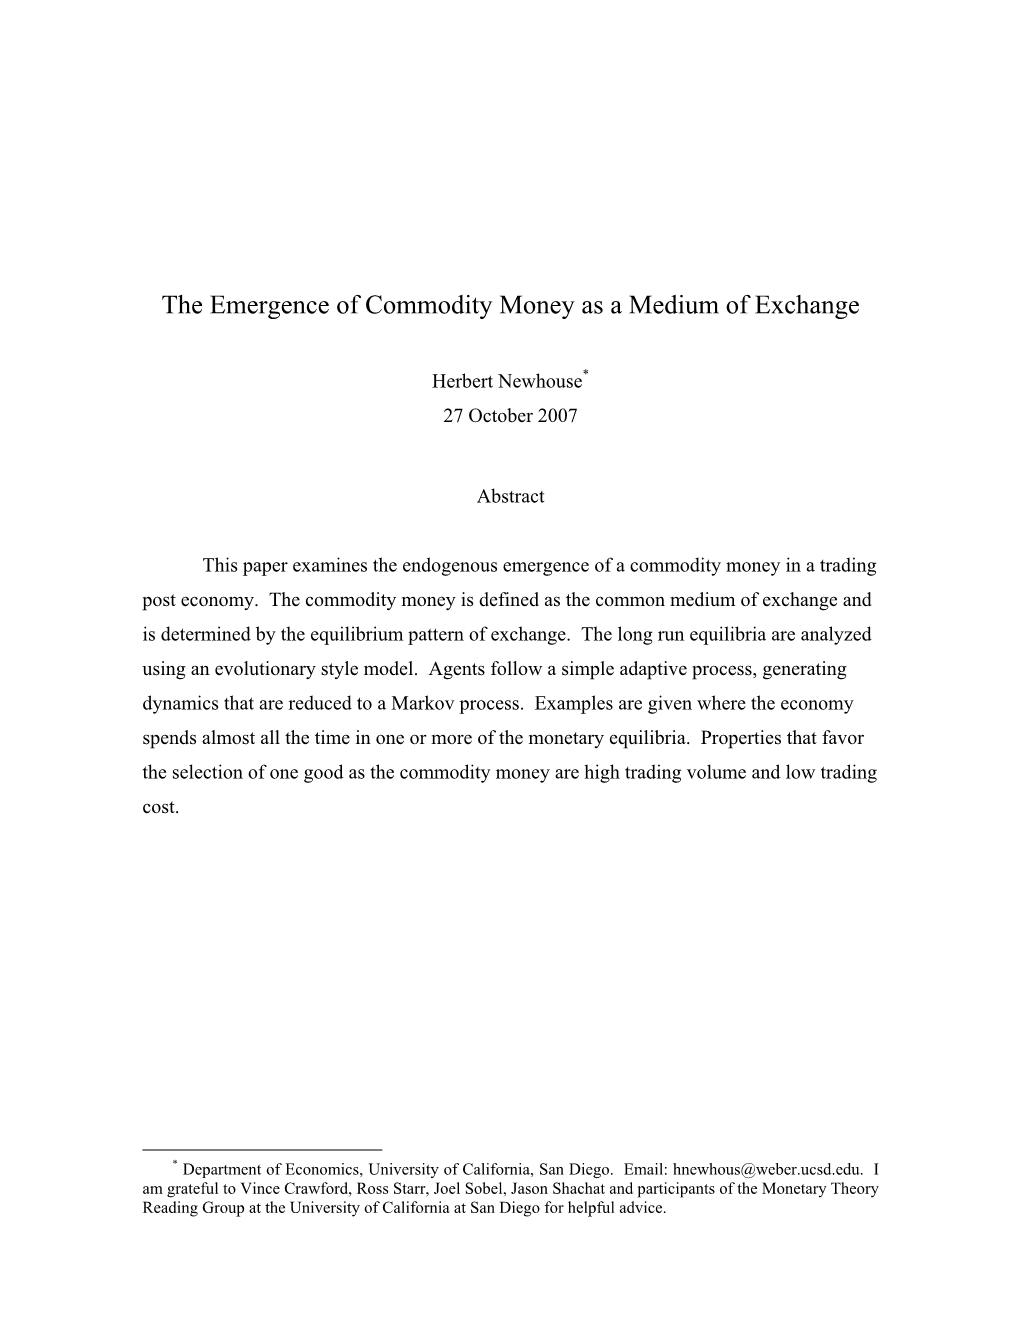 The Emergence of Commodity Money As a Medium of Exchange